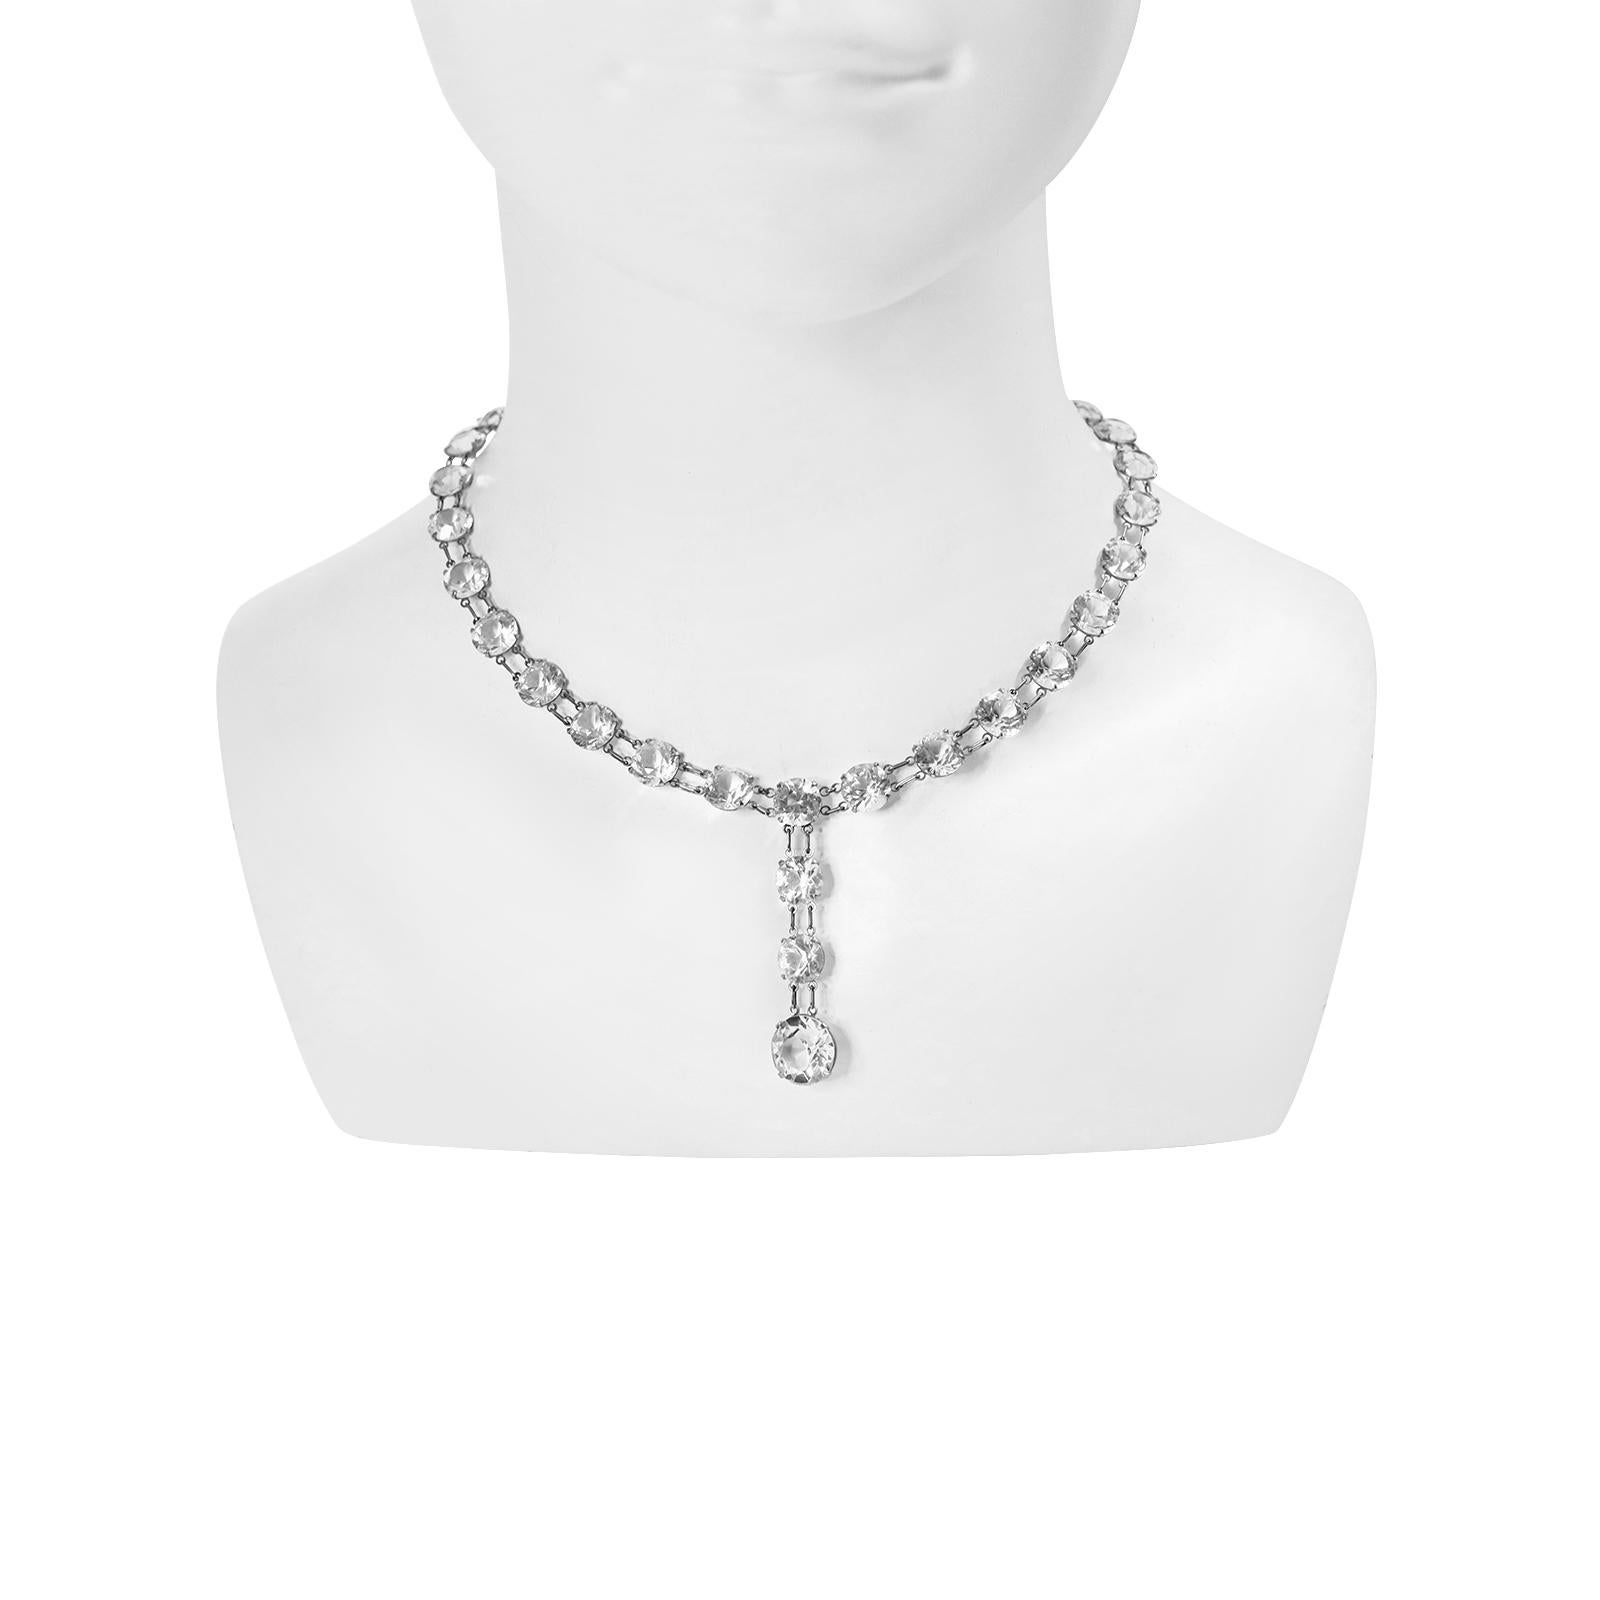 Vintage Open Back Crystal Necklace with Dangling Piece Circa 1920s For Sale 2